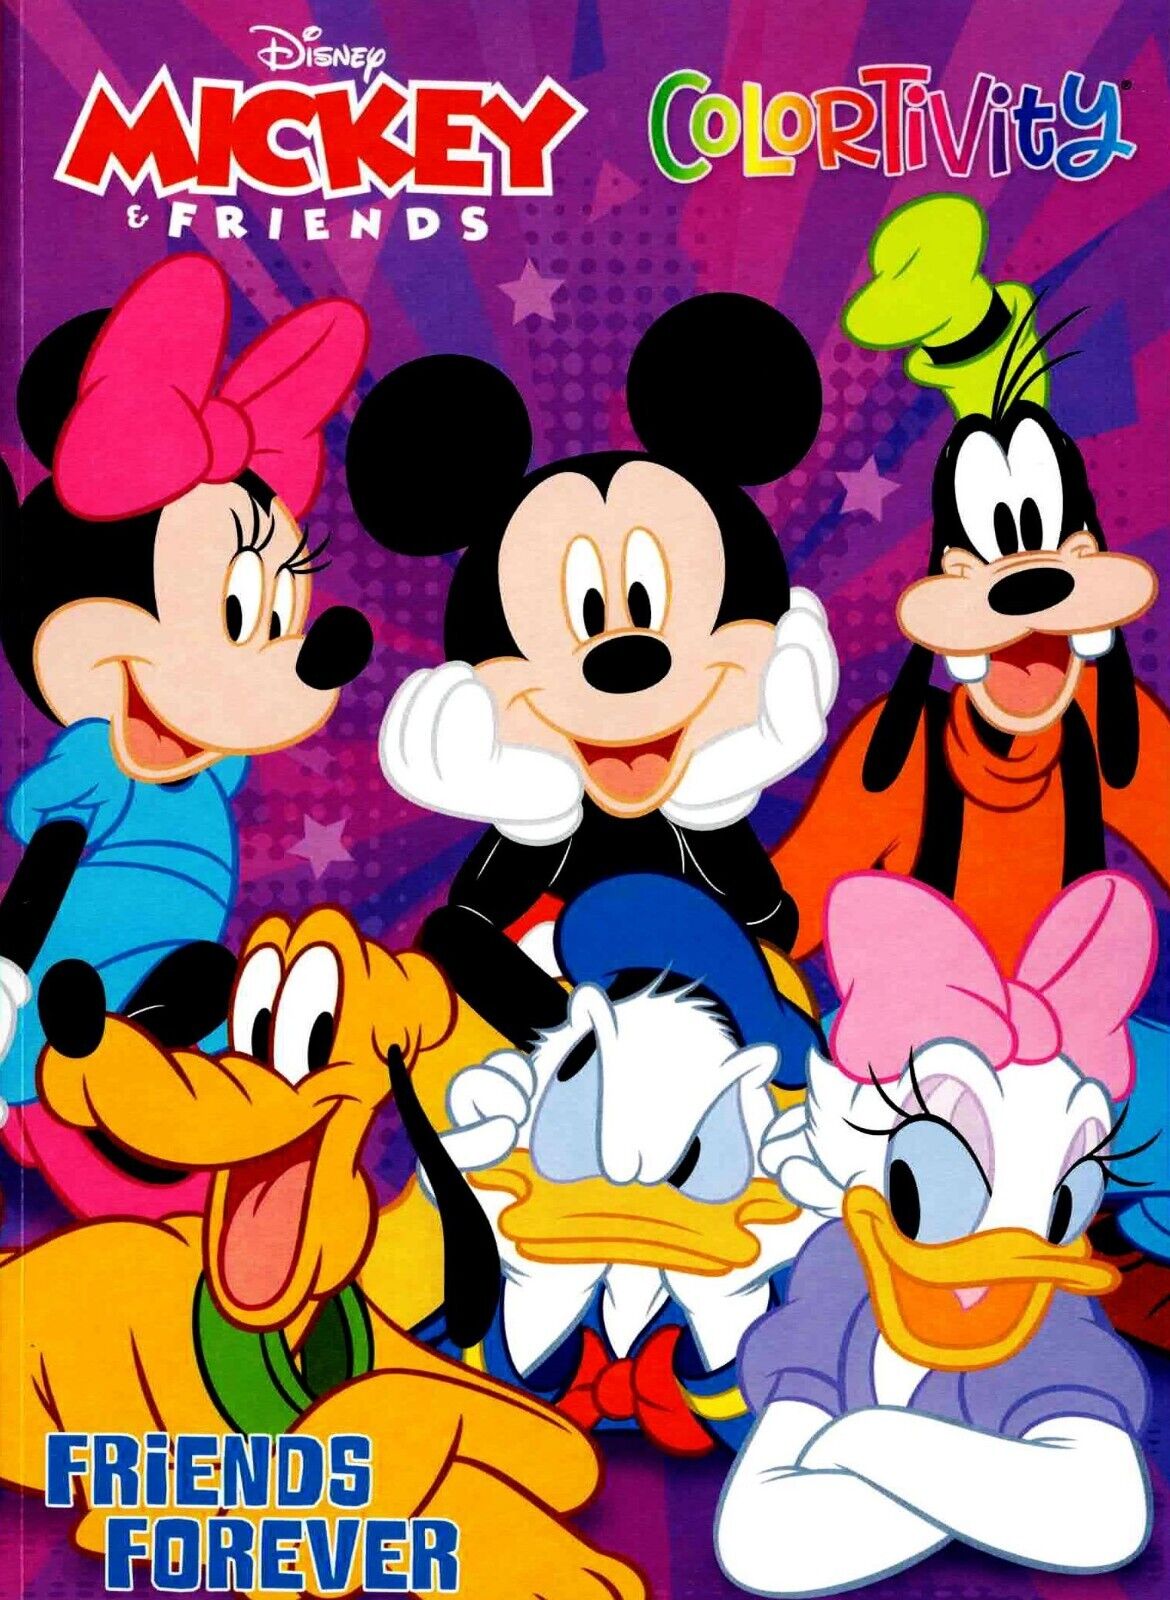 Colortivity - Disney Mickey Friends - Friends Forever - Coloring & Activity Book